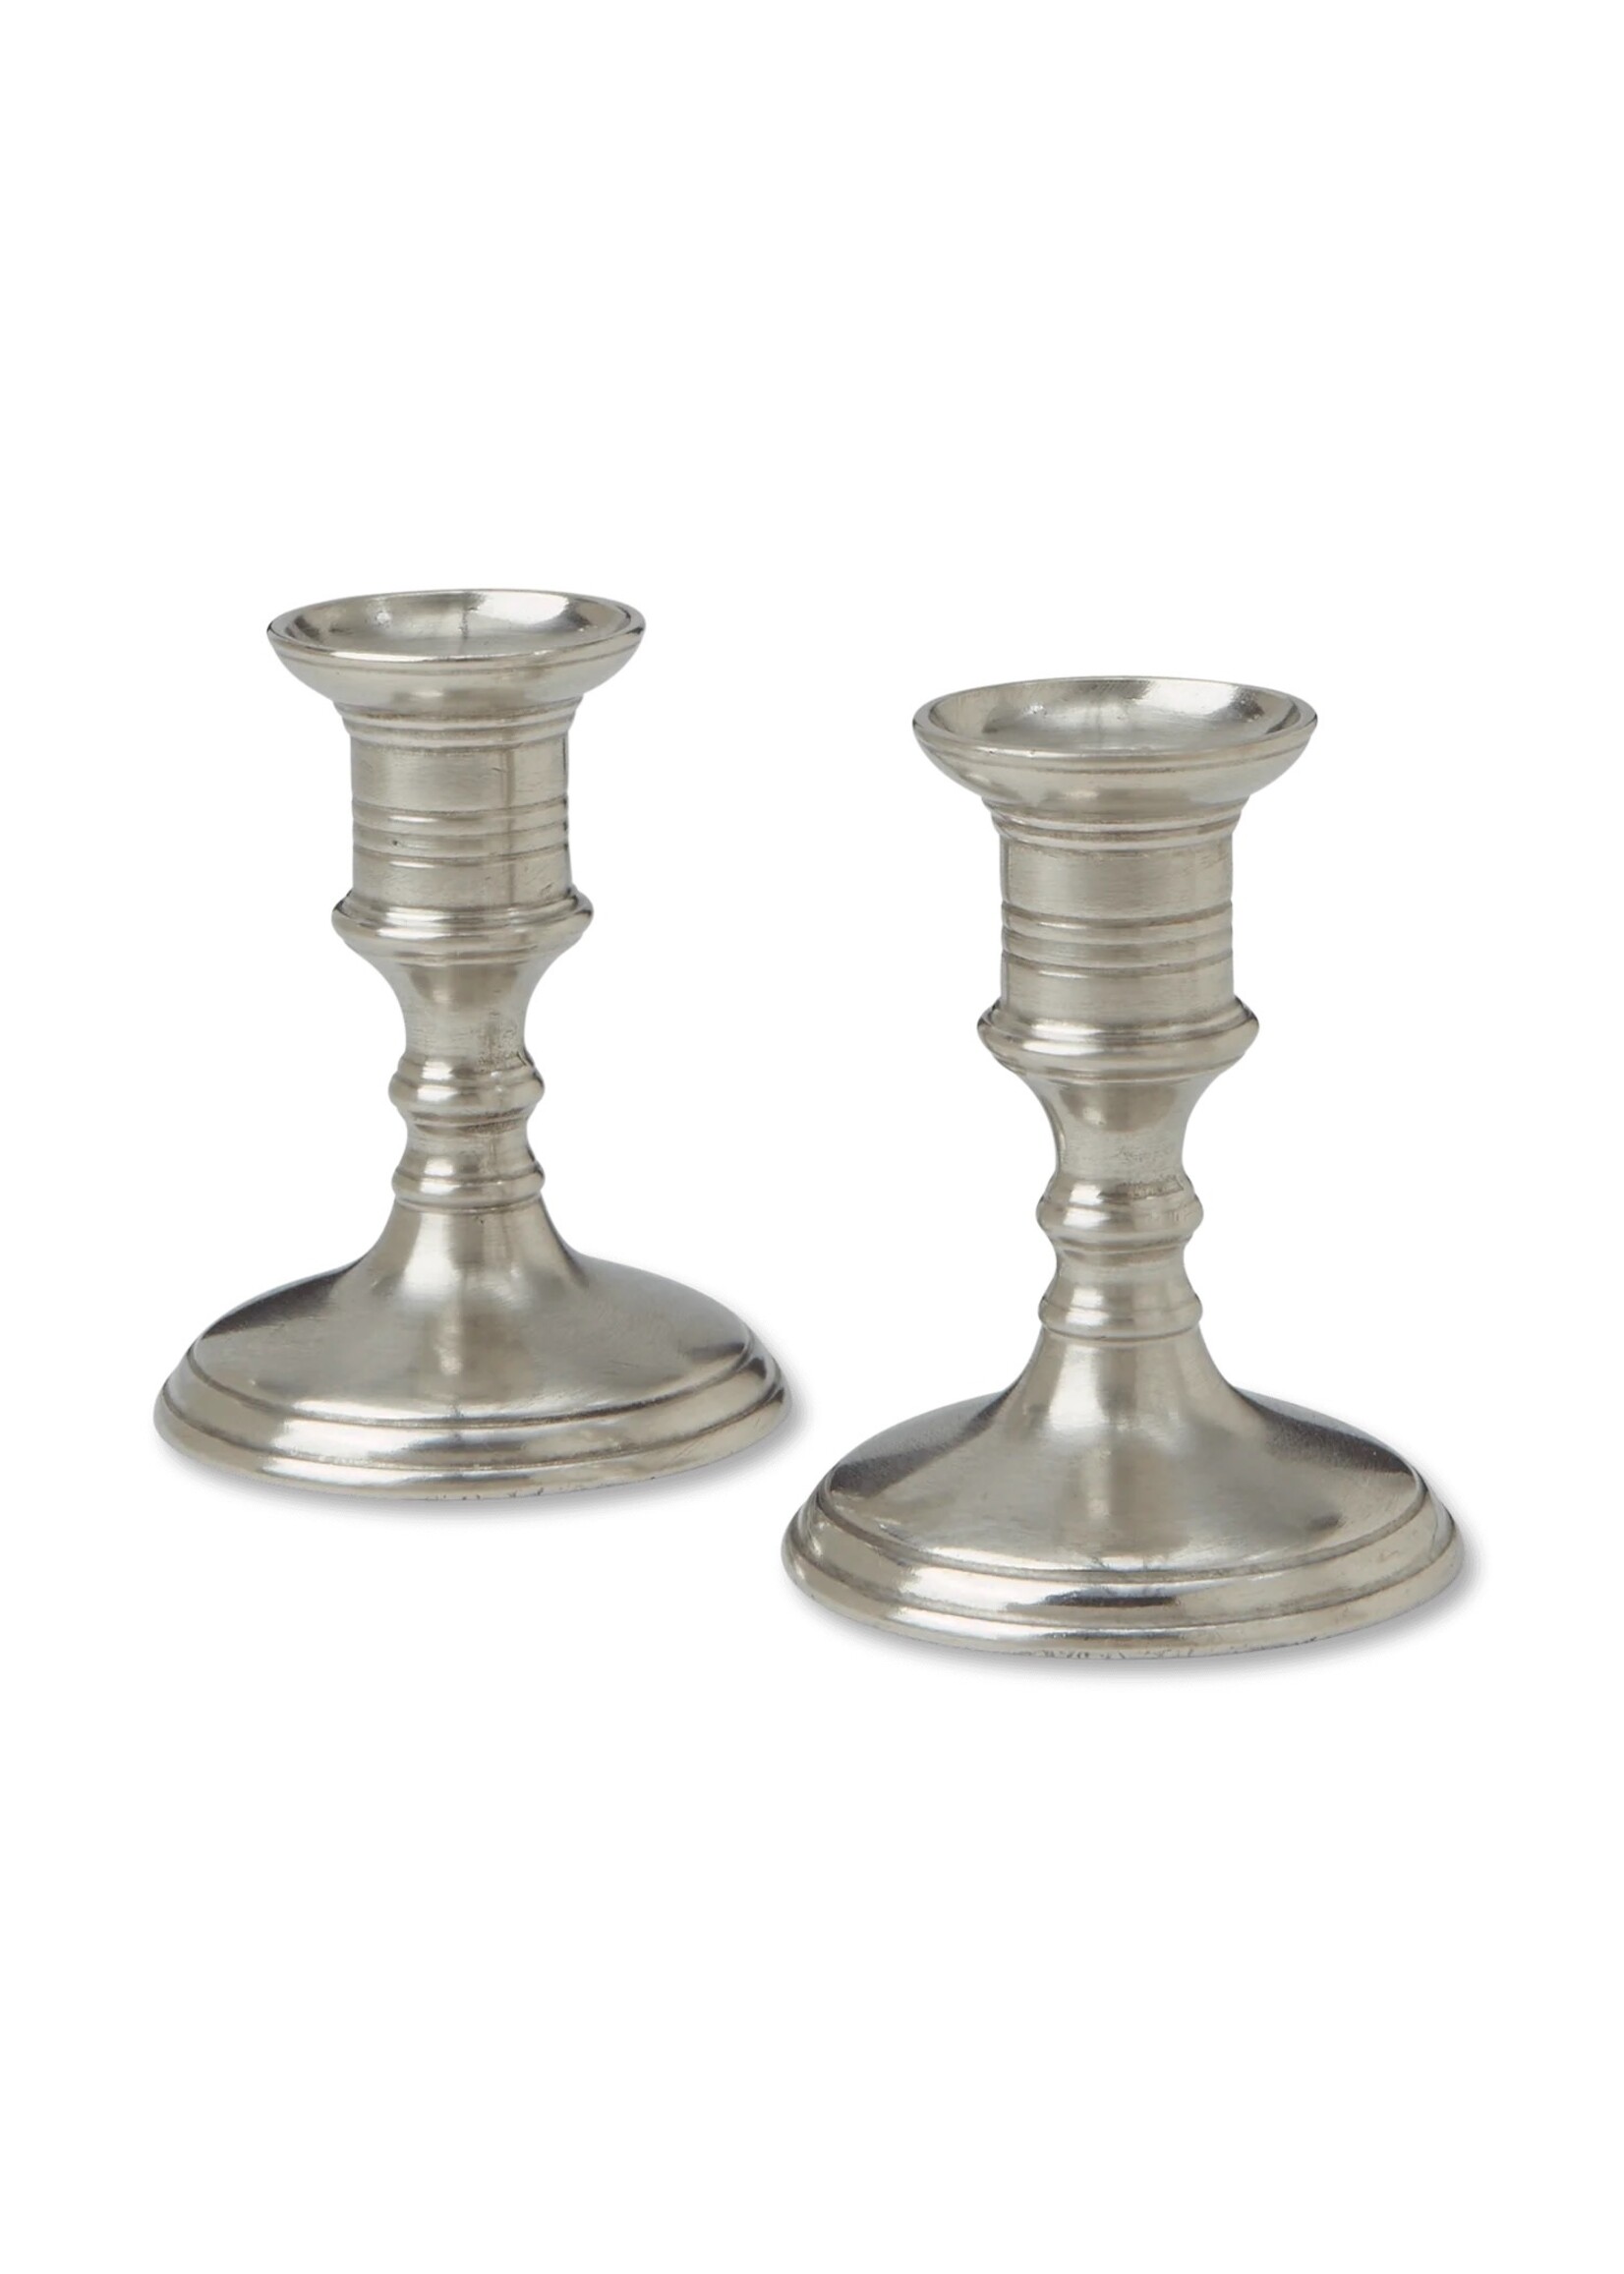 Match Pewter Candlestick - Prato Small Pair